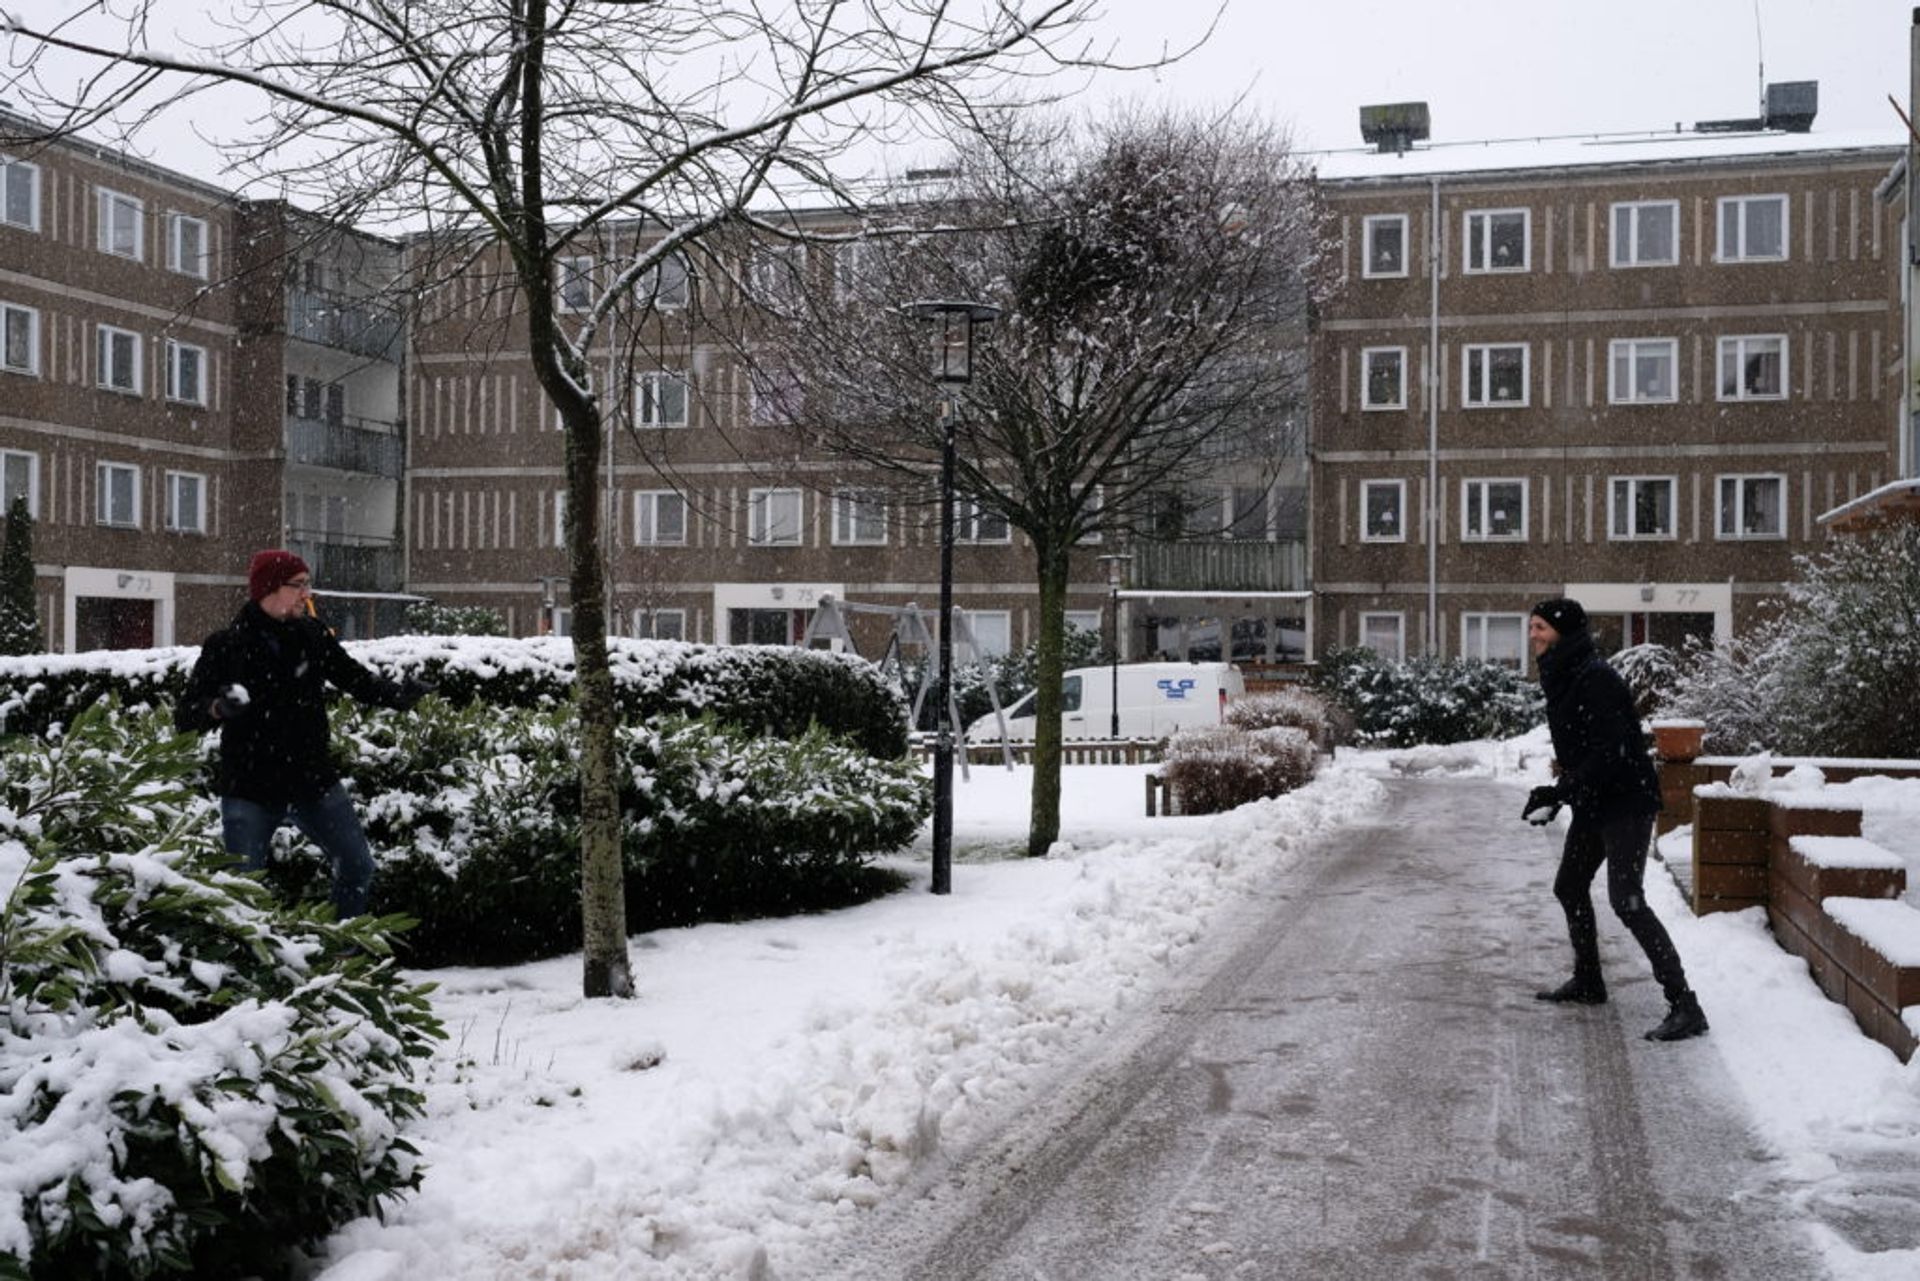 People throwing snowballs at each other in a residential area.